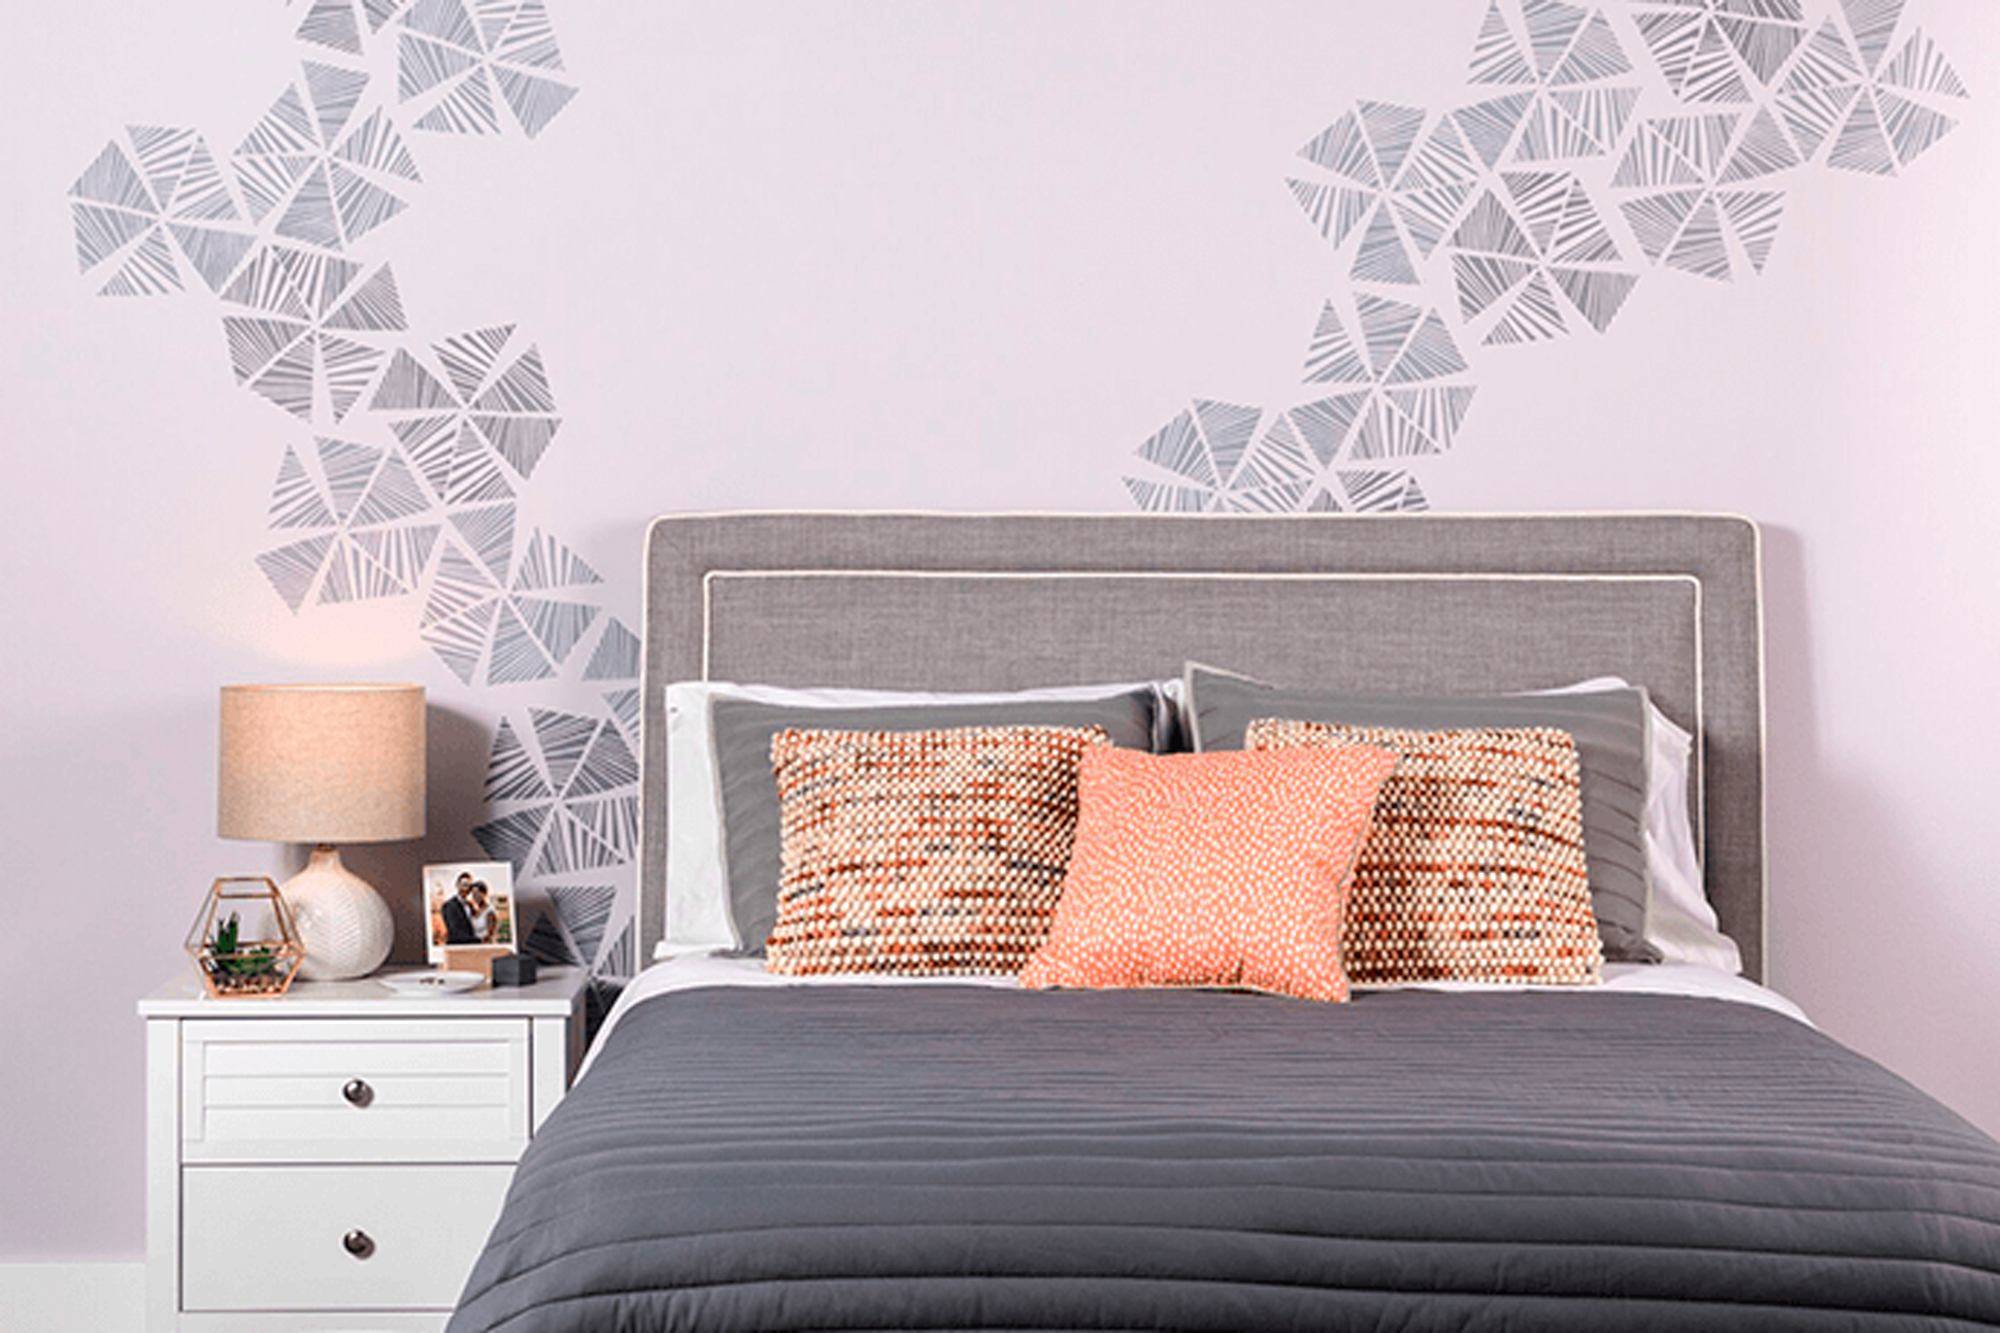 Bedroom with stenciled pattern on wall